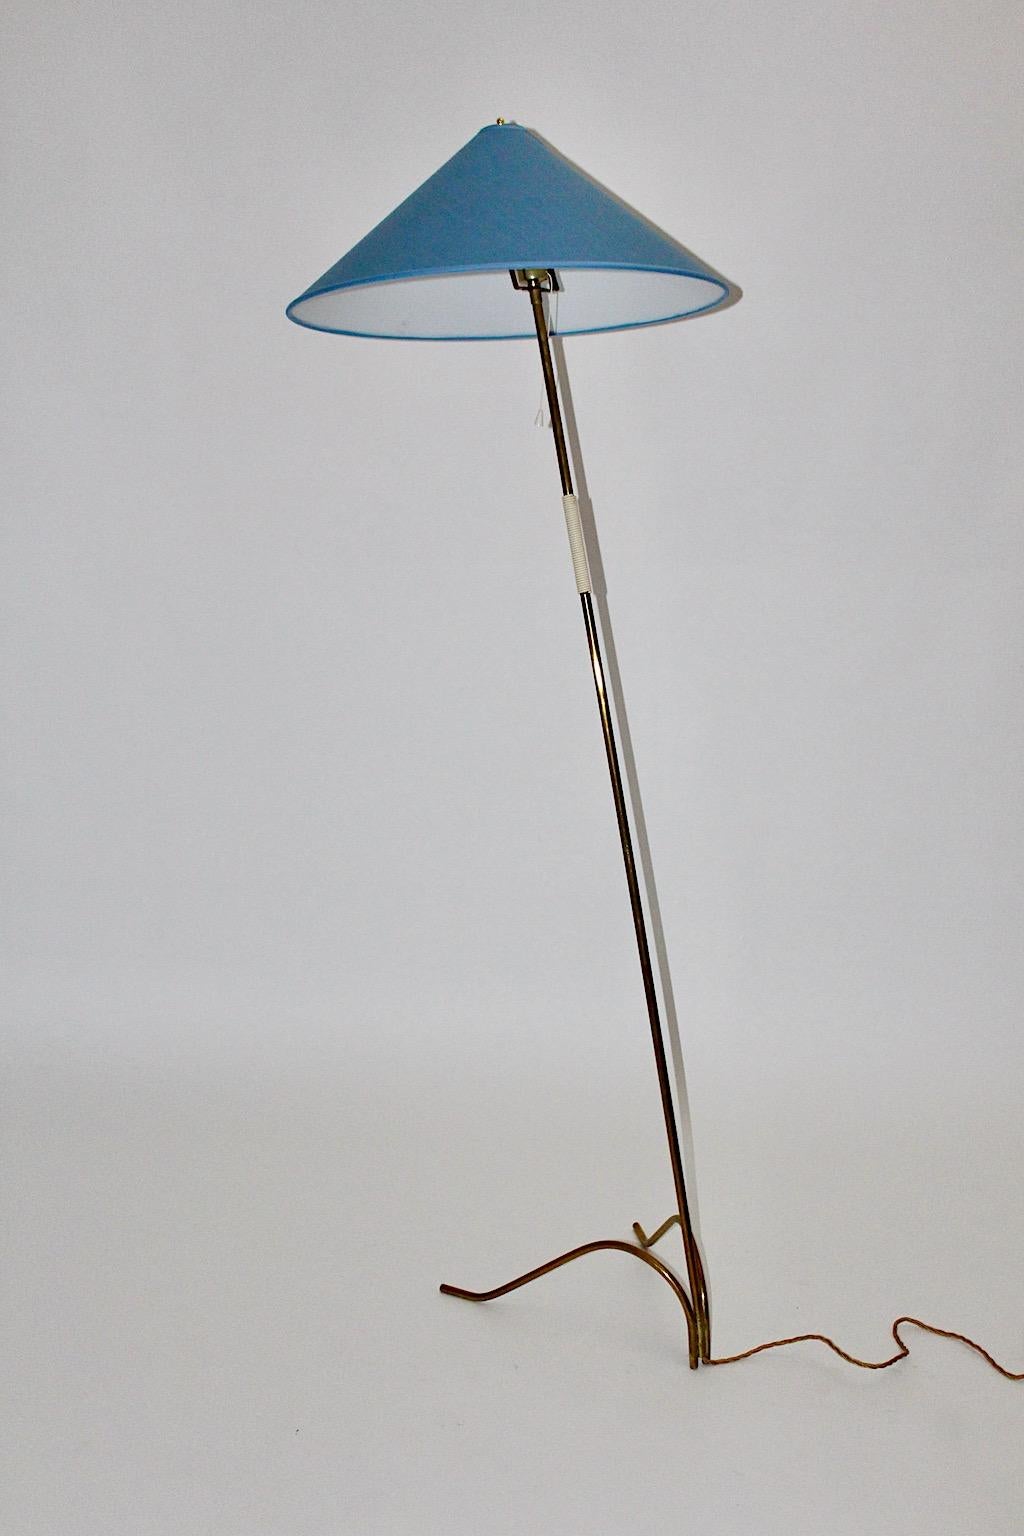 Mid-Century Modern brass floor lamp by Rupert Nikoll 1950s, Vienna.
A beautiful and iconic floor lamp from brass with a plastic string handle for an easy handling.
While the base features a significant splayfoot from brass, we decided to  replace